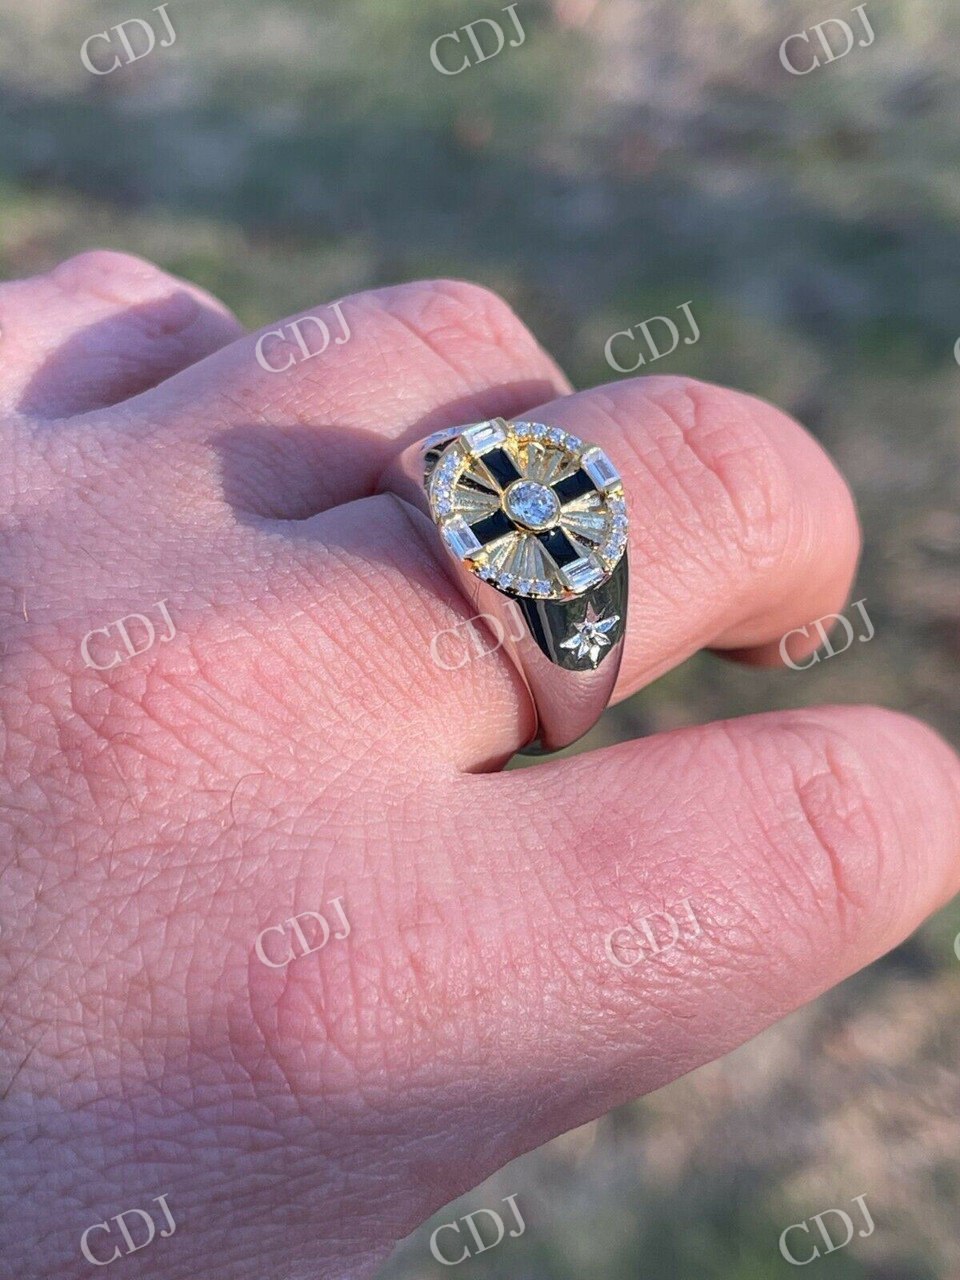 14K Gold iced Out Ring  customdiamjewel   